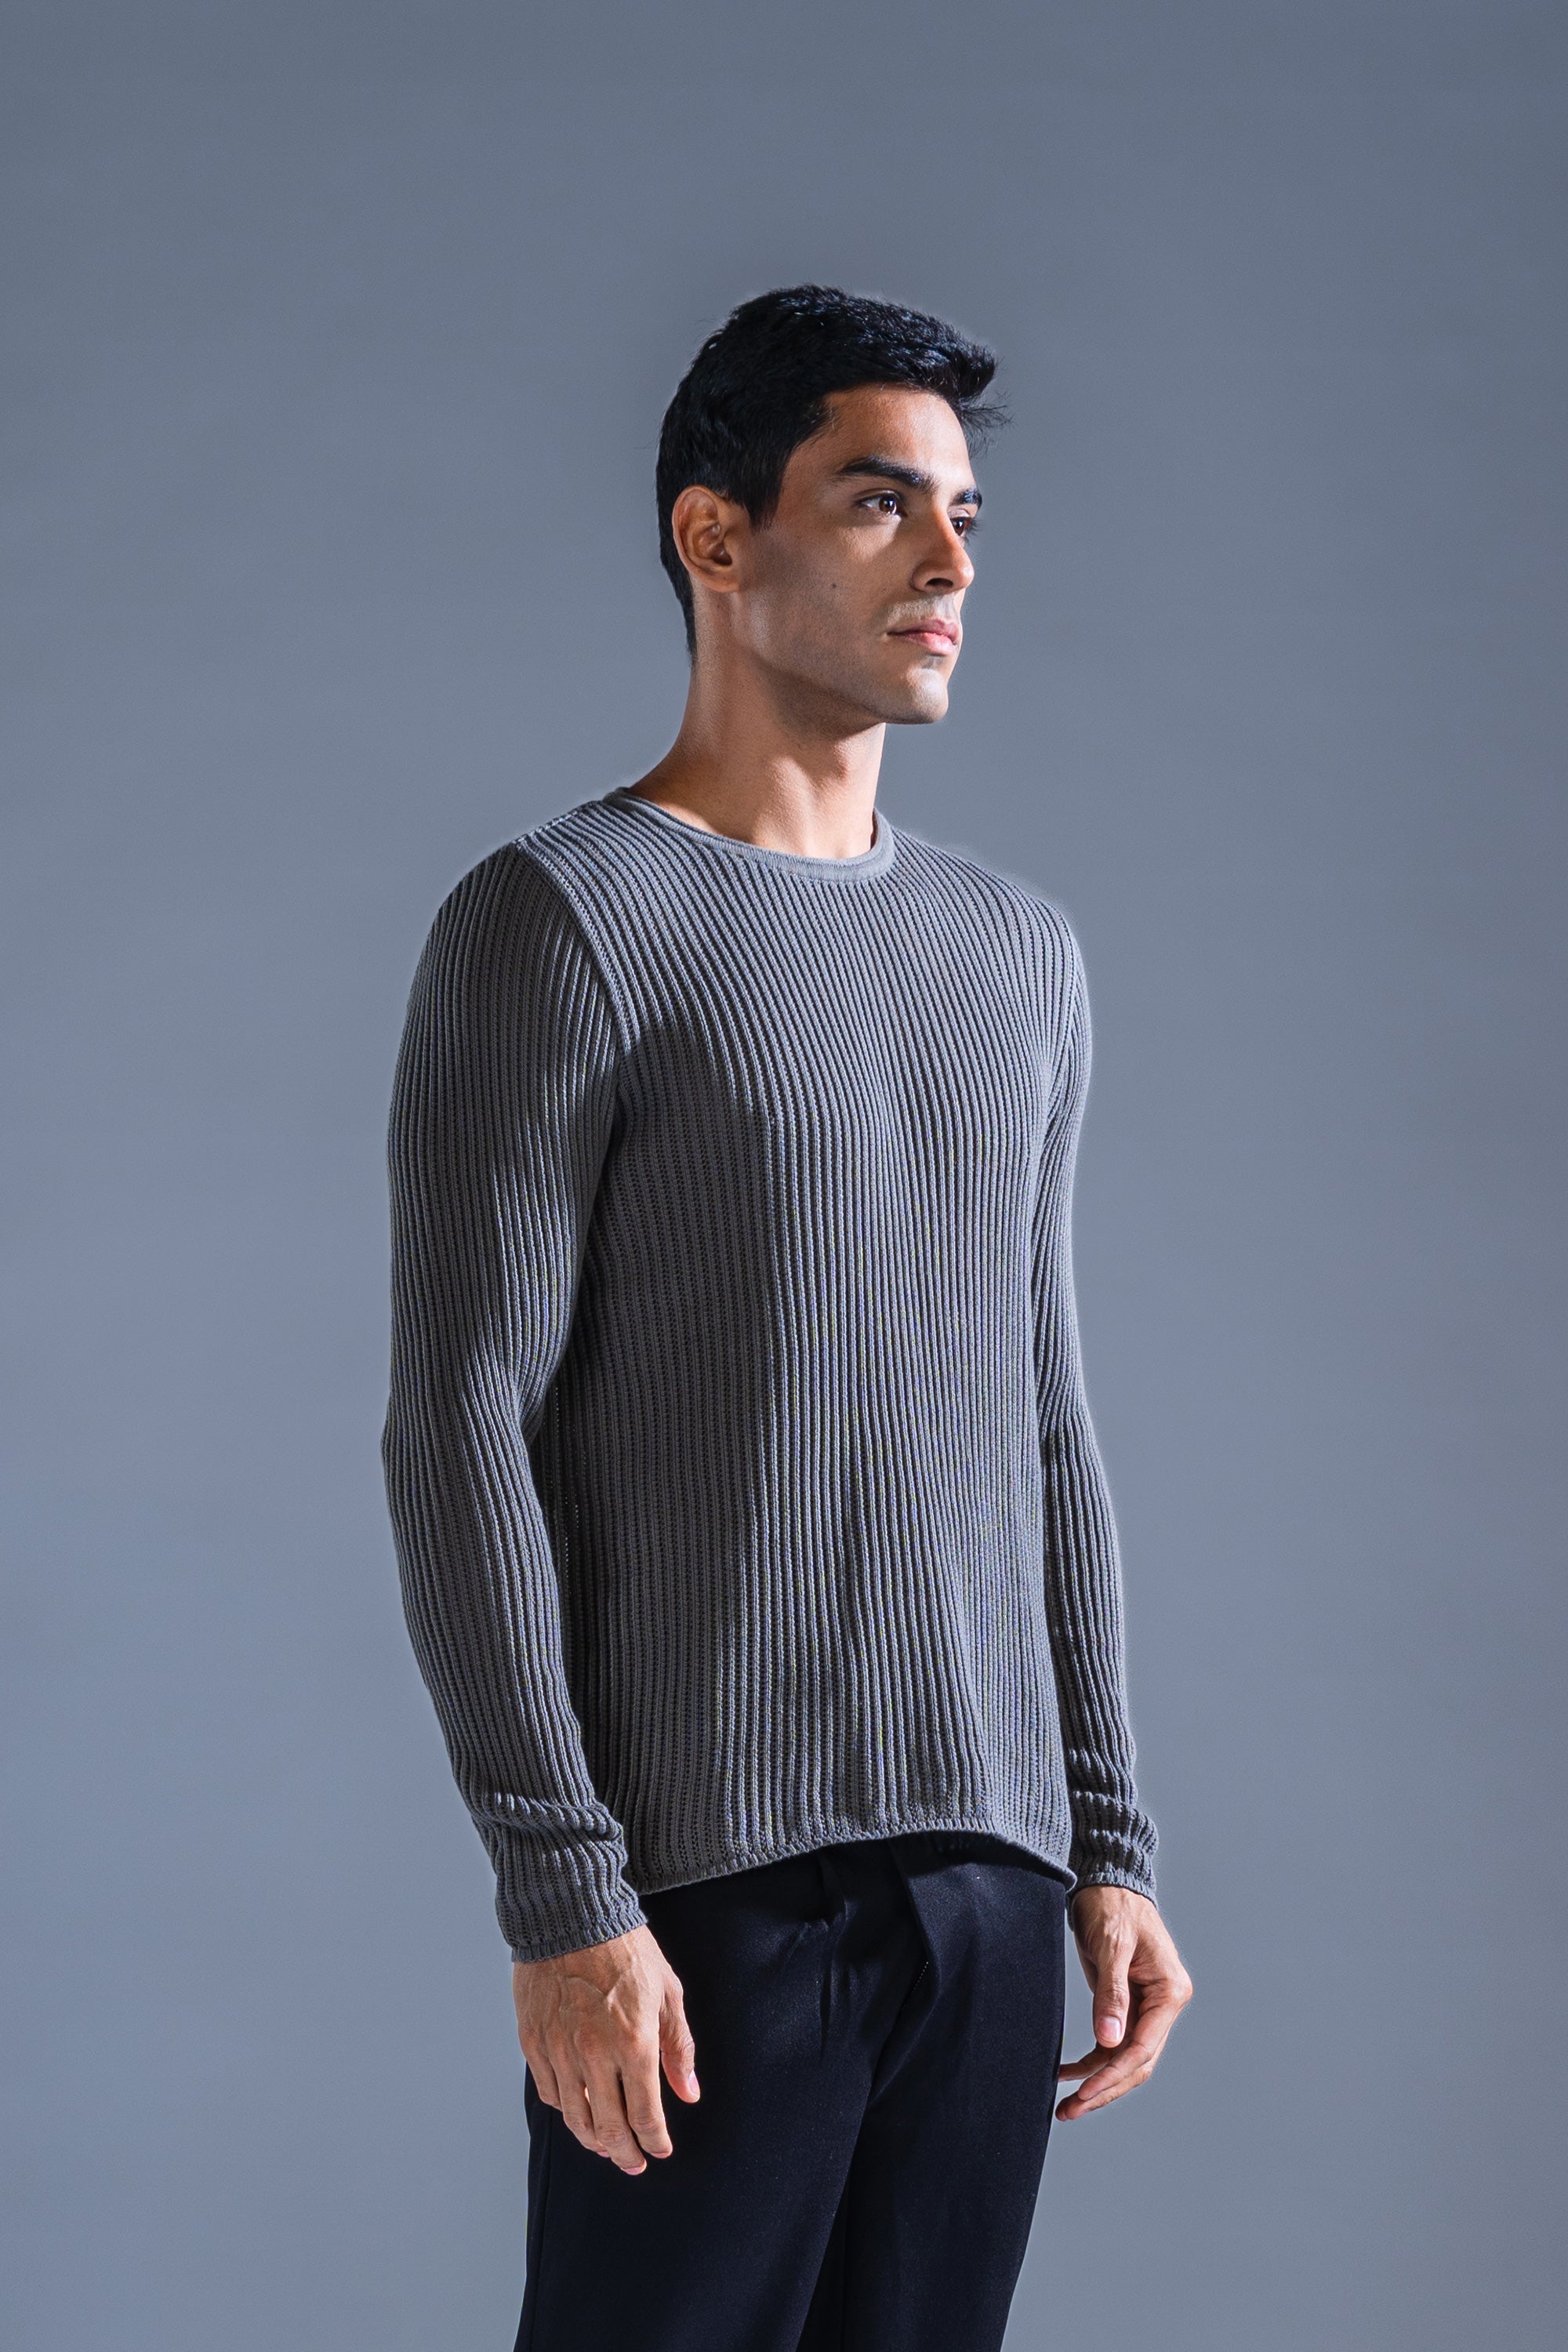 NOVICA Artisan Handmade Men's Cotton Sweater Stone Washed Pullover Clothing  Grey India 'Stylish in Charcoal